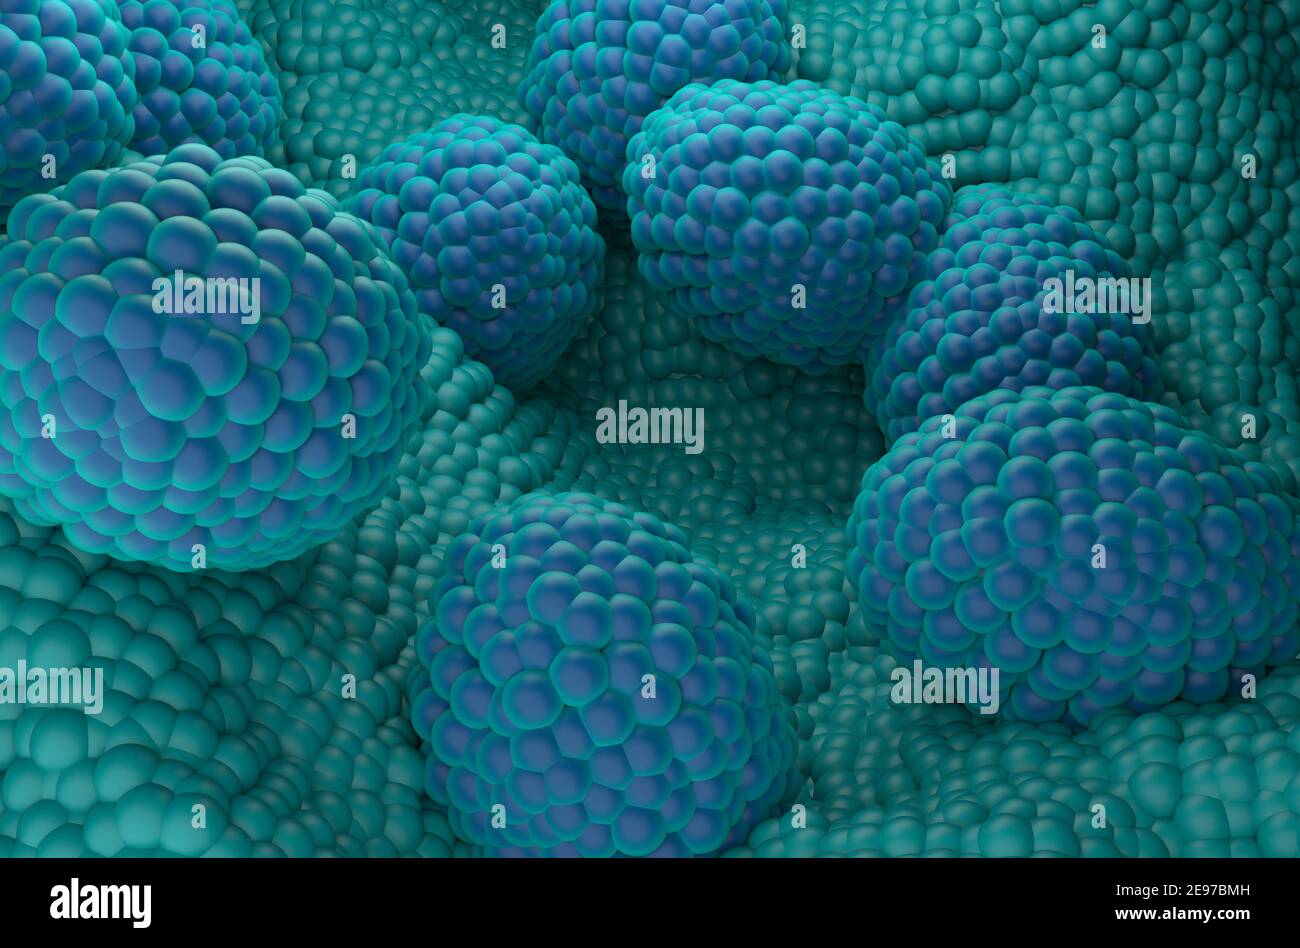 Prostate cancer cells 3d illustration isometric view Stock Photo